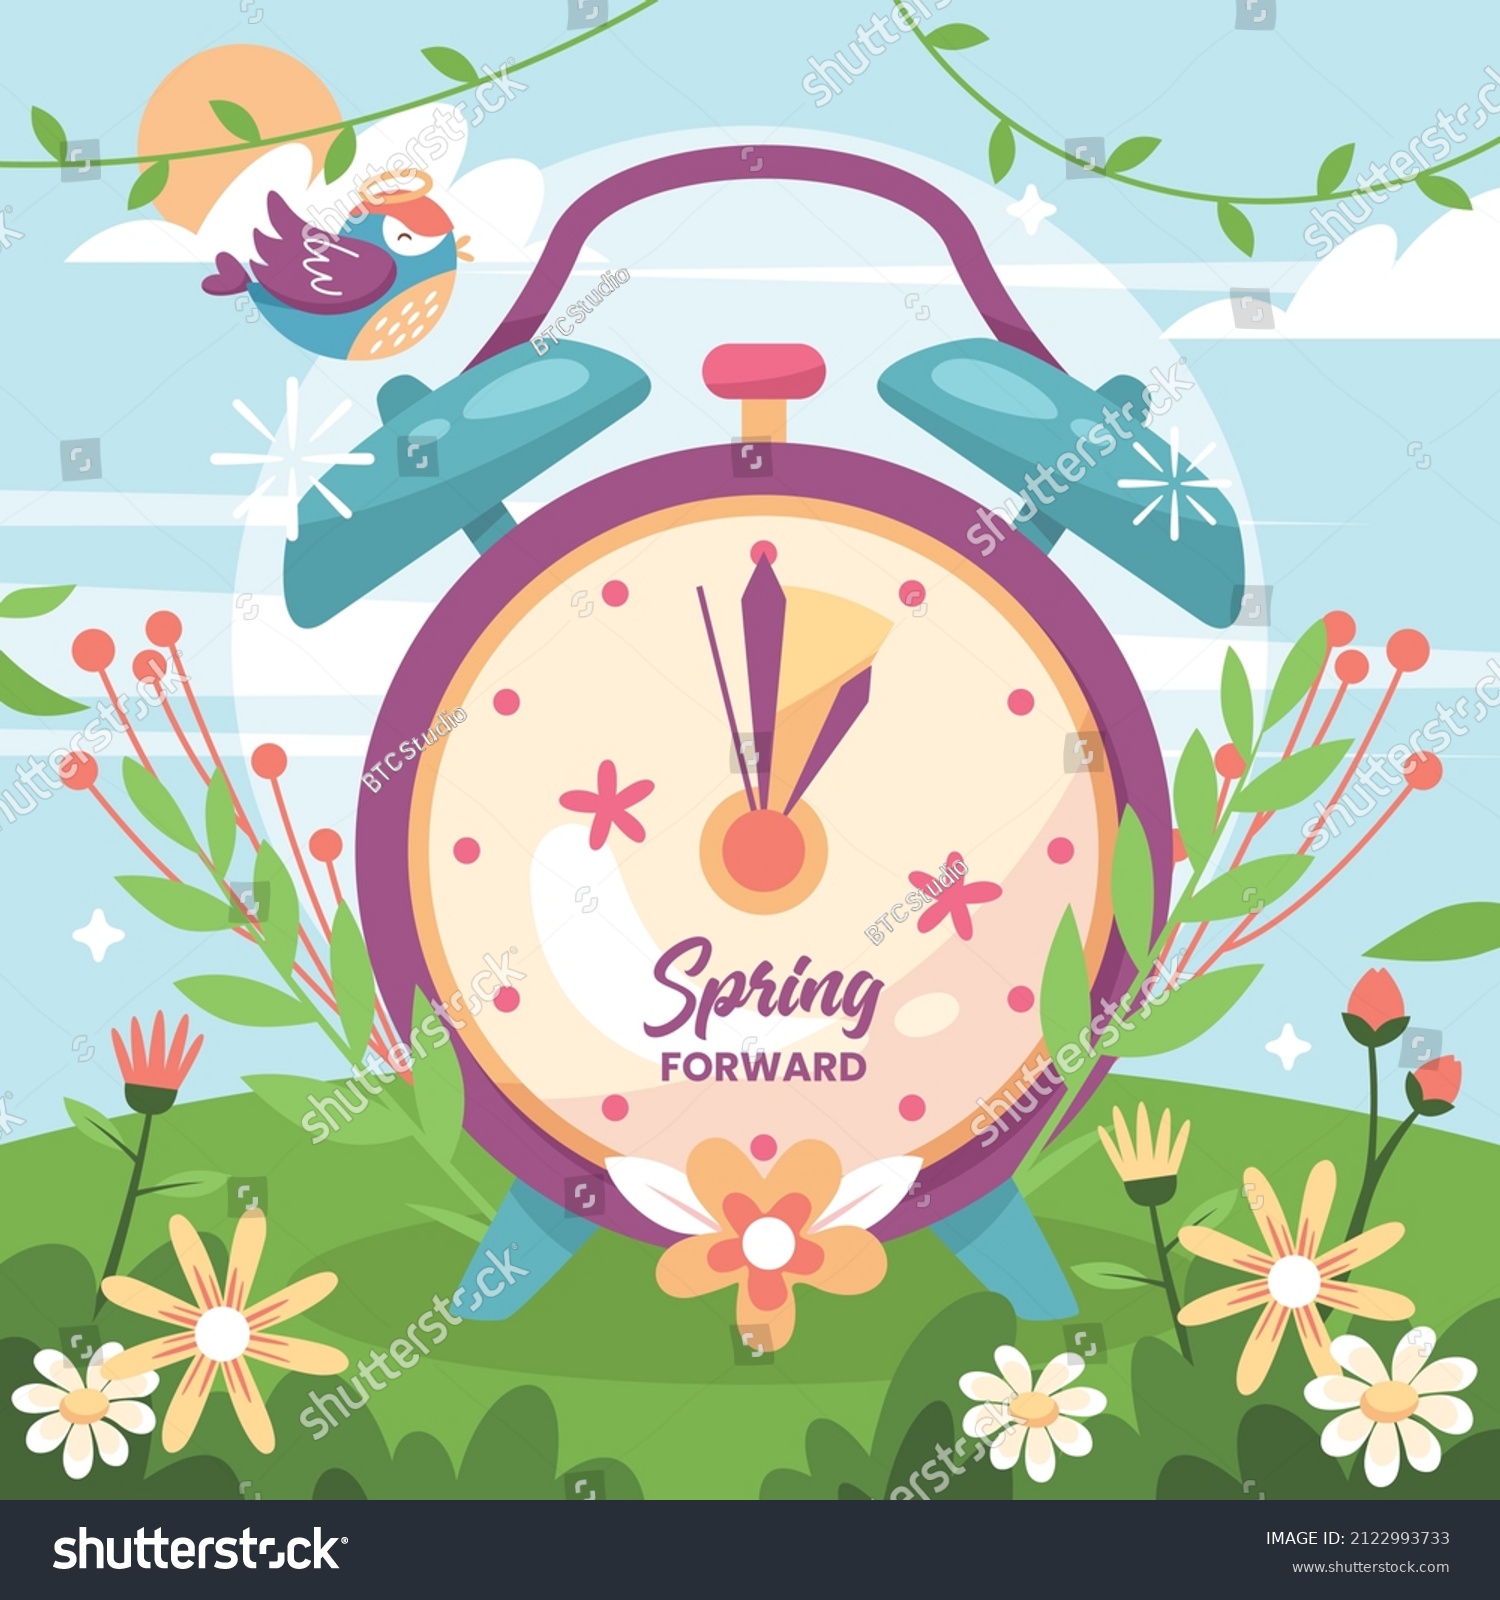 Daylight Saving Time Concept Clocks Moves Stock Vector Royalty Free Shutterstock